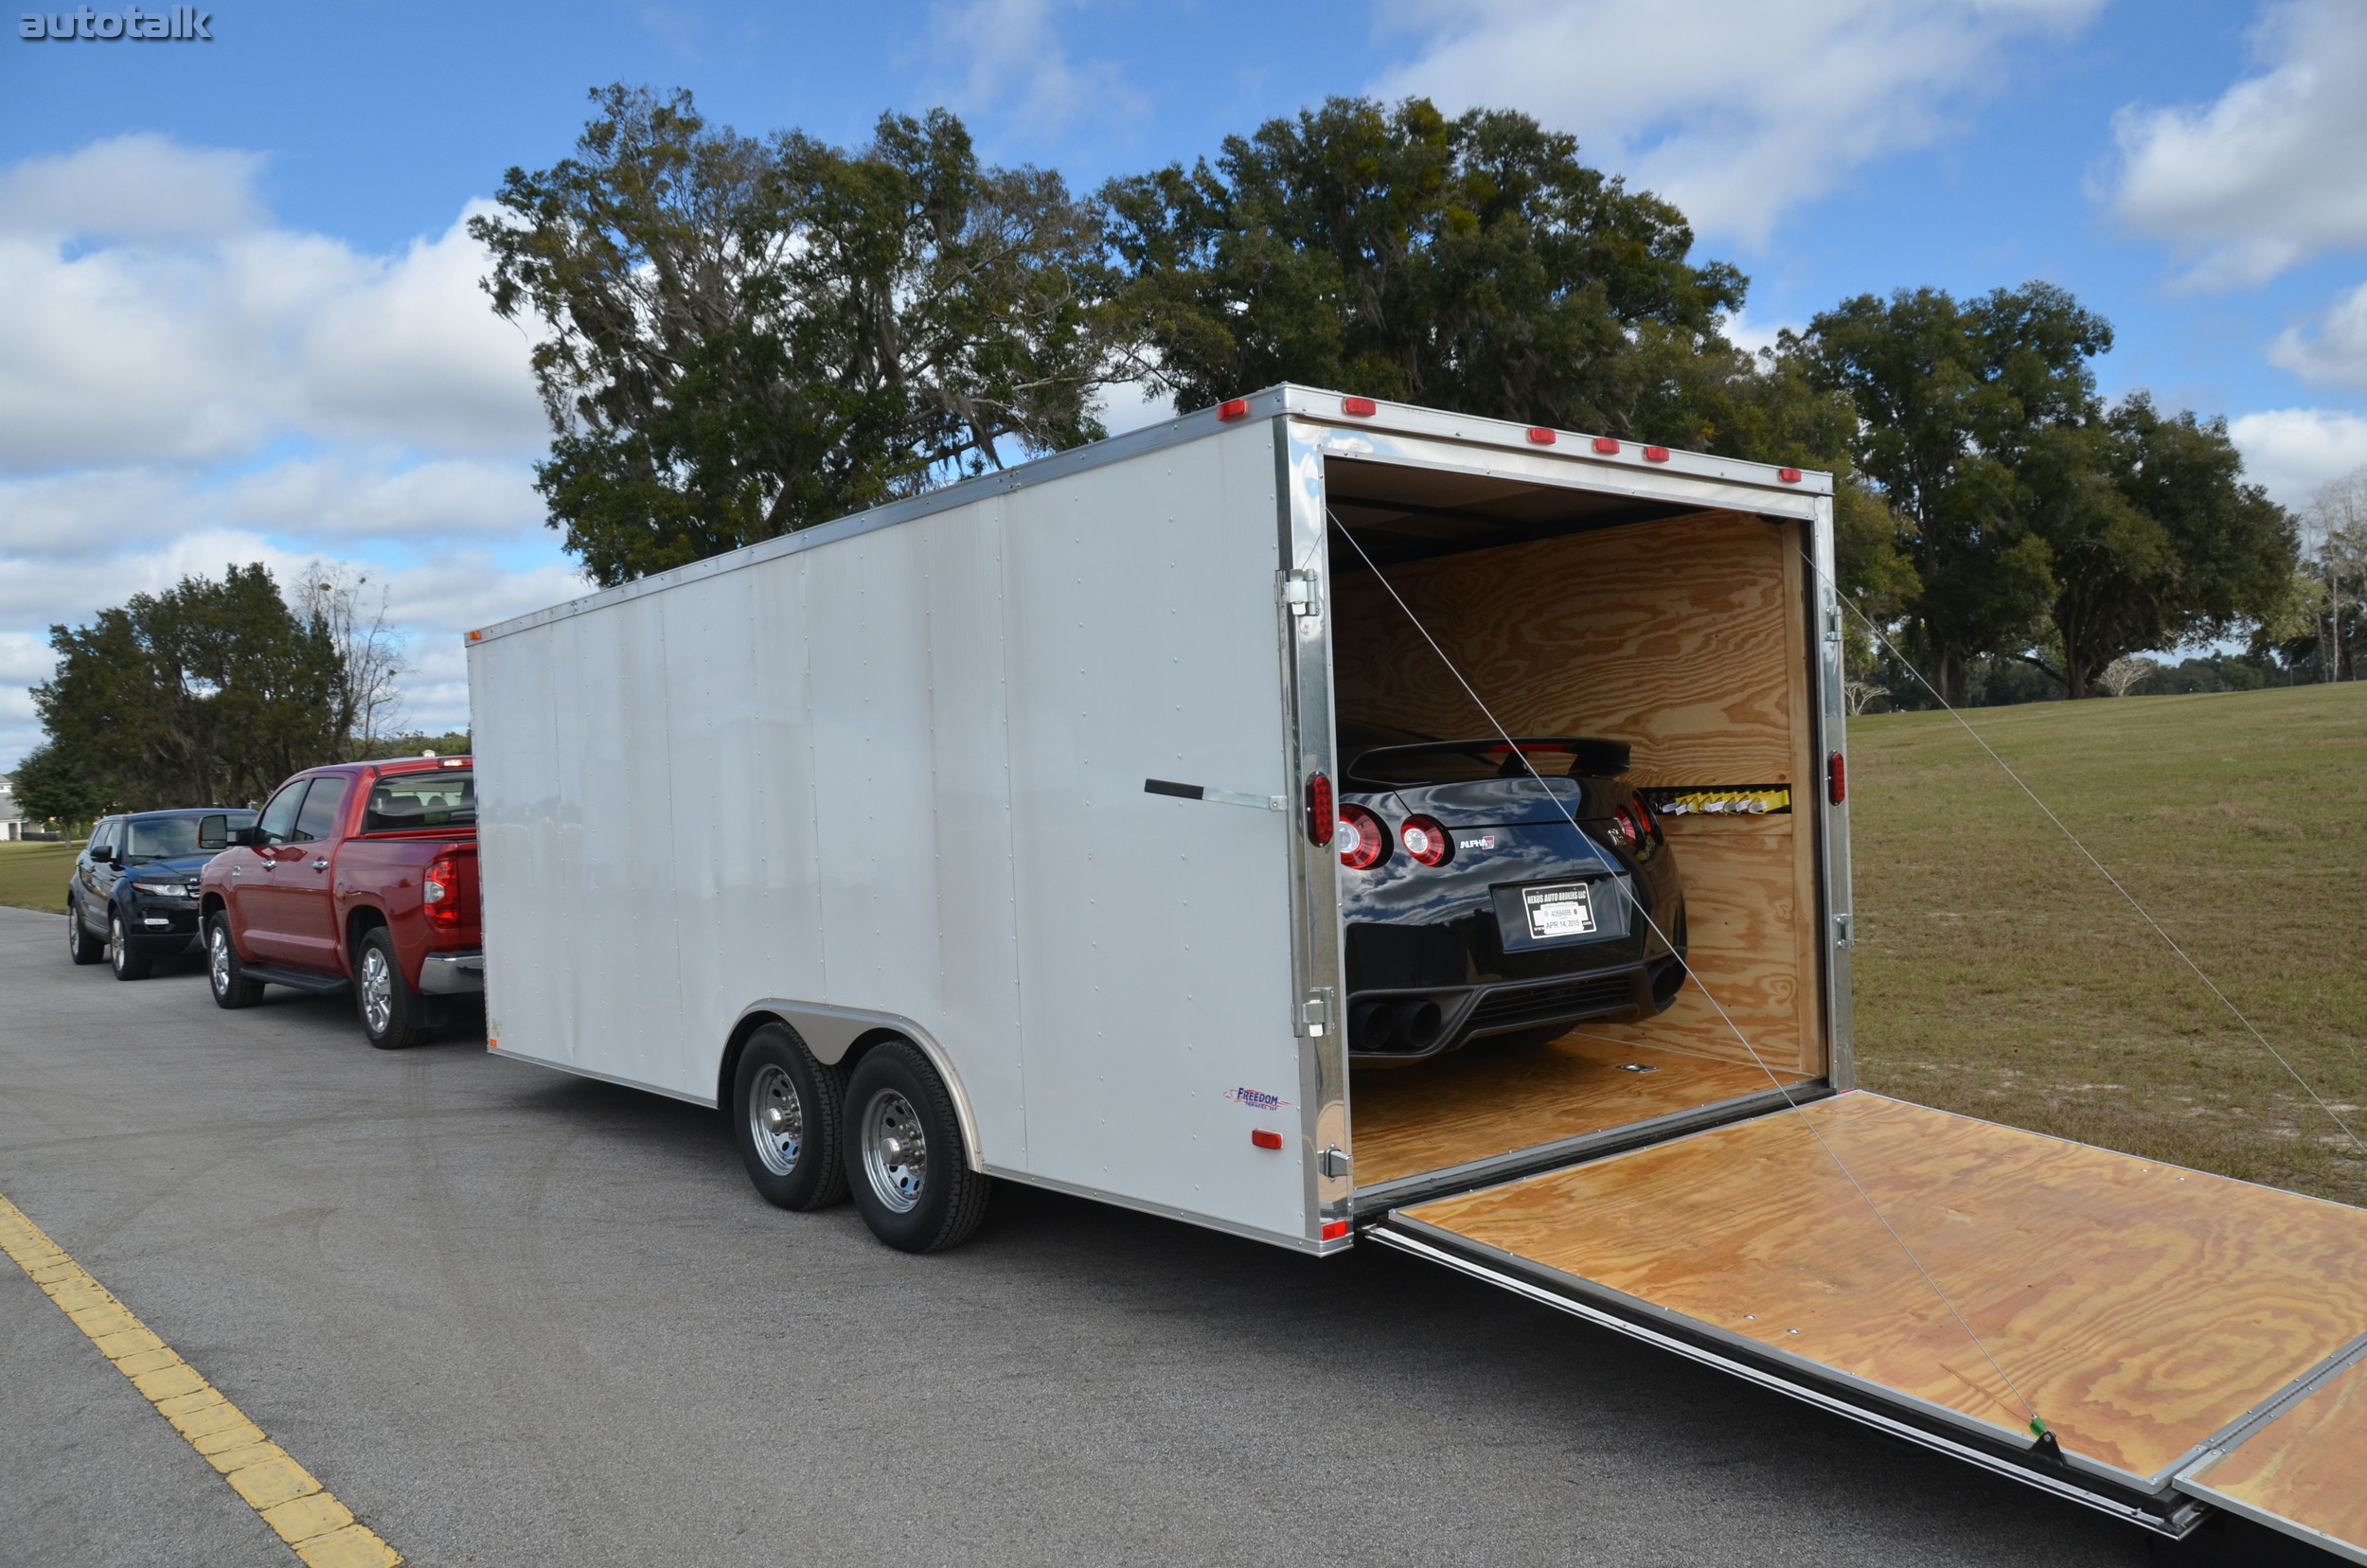 2014 Toyota Tundra 1794 Towing Review